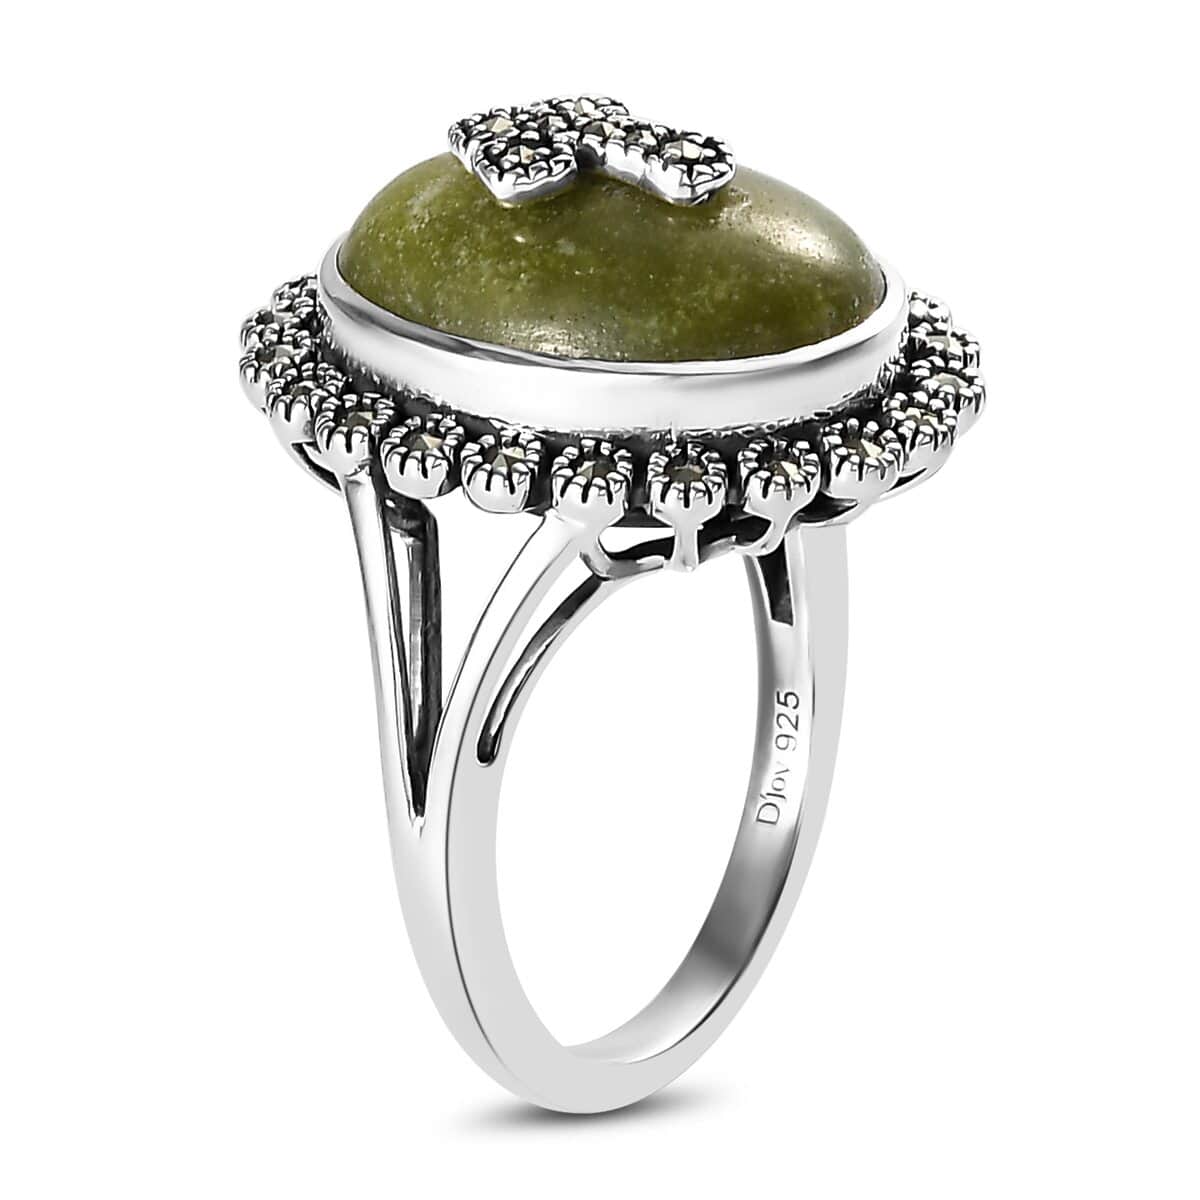 Connemara Marble and Swiss Marcasite Ring in Sterling Silver 7.65 ctw (Delivery in 3-5 Business Days) image number 3